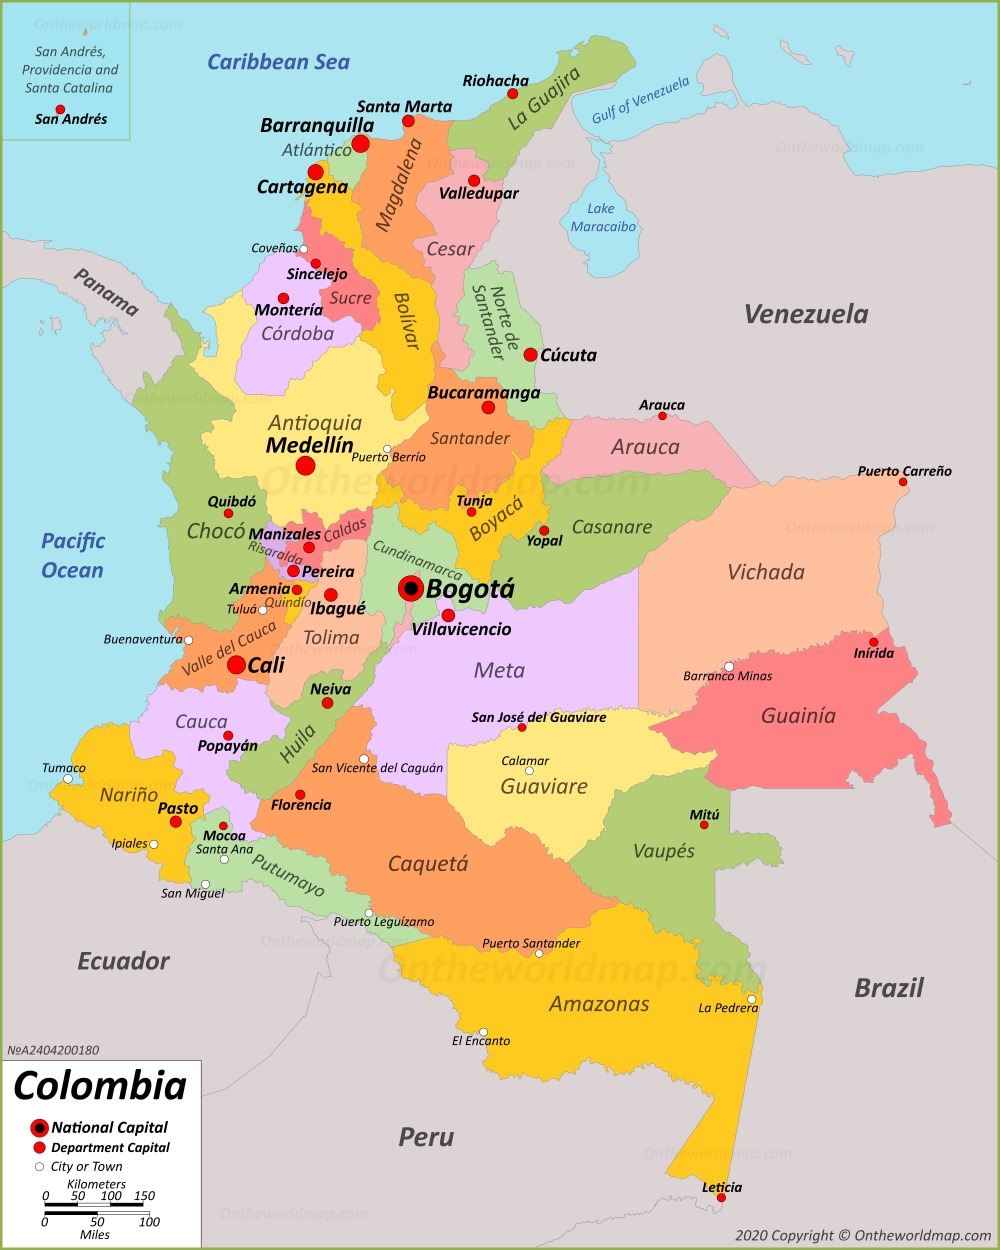 Colombia Maps | Maps of Colombia